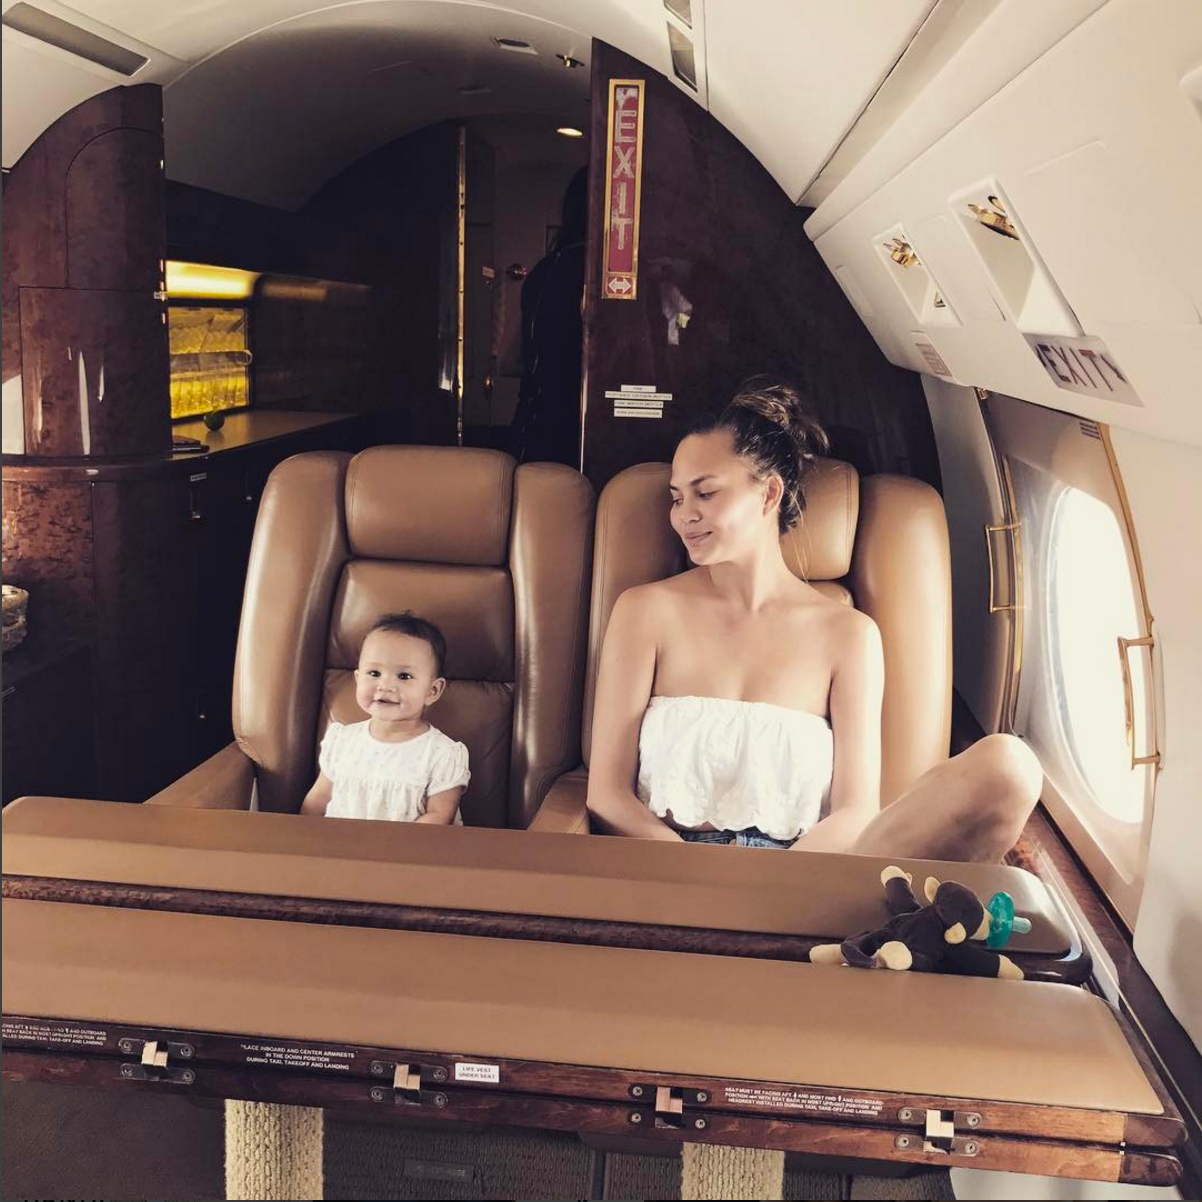 John Legend And Chrissy Teigen's Daughter Might Be The Most Adorable Baby On The 'Gram
